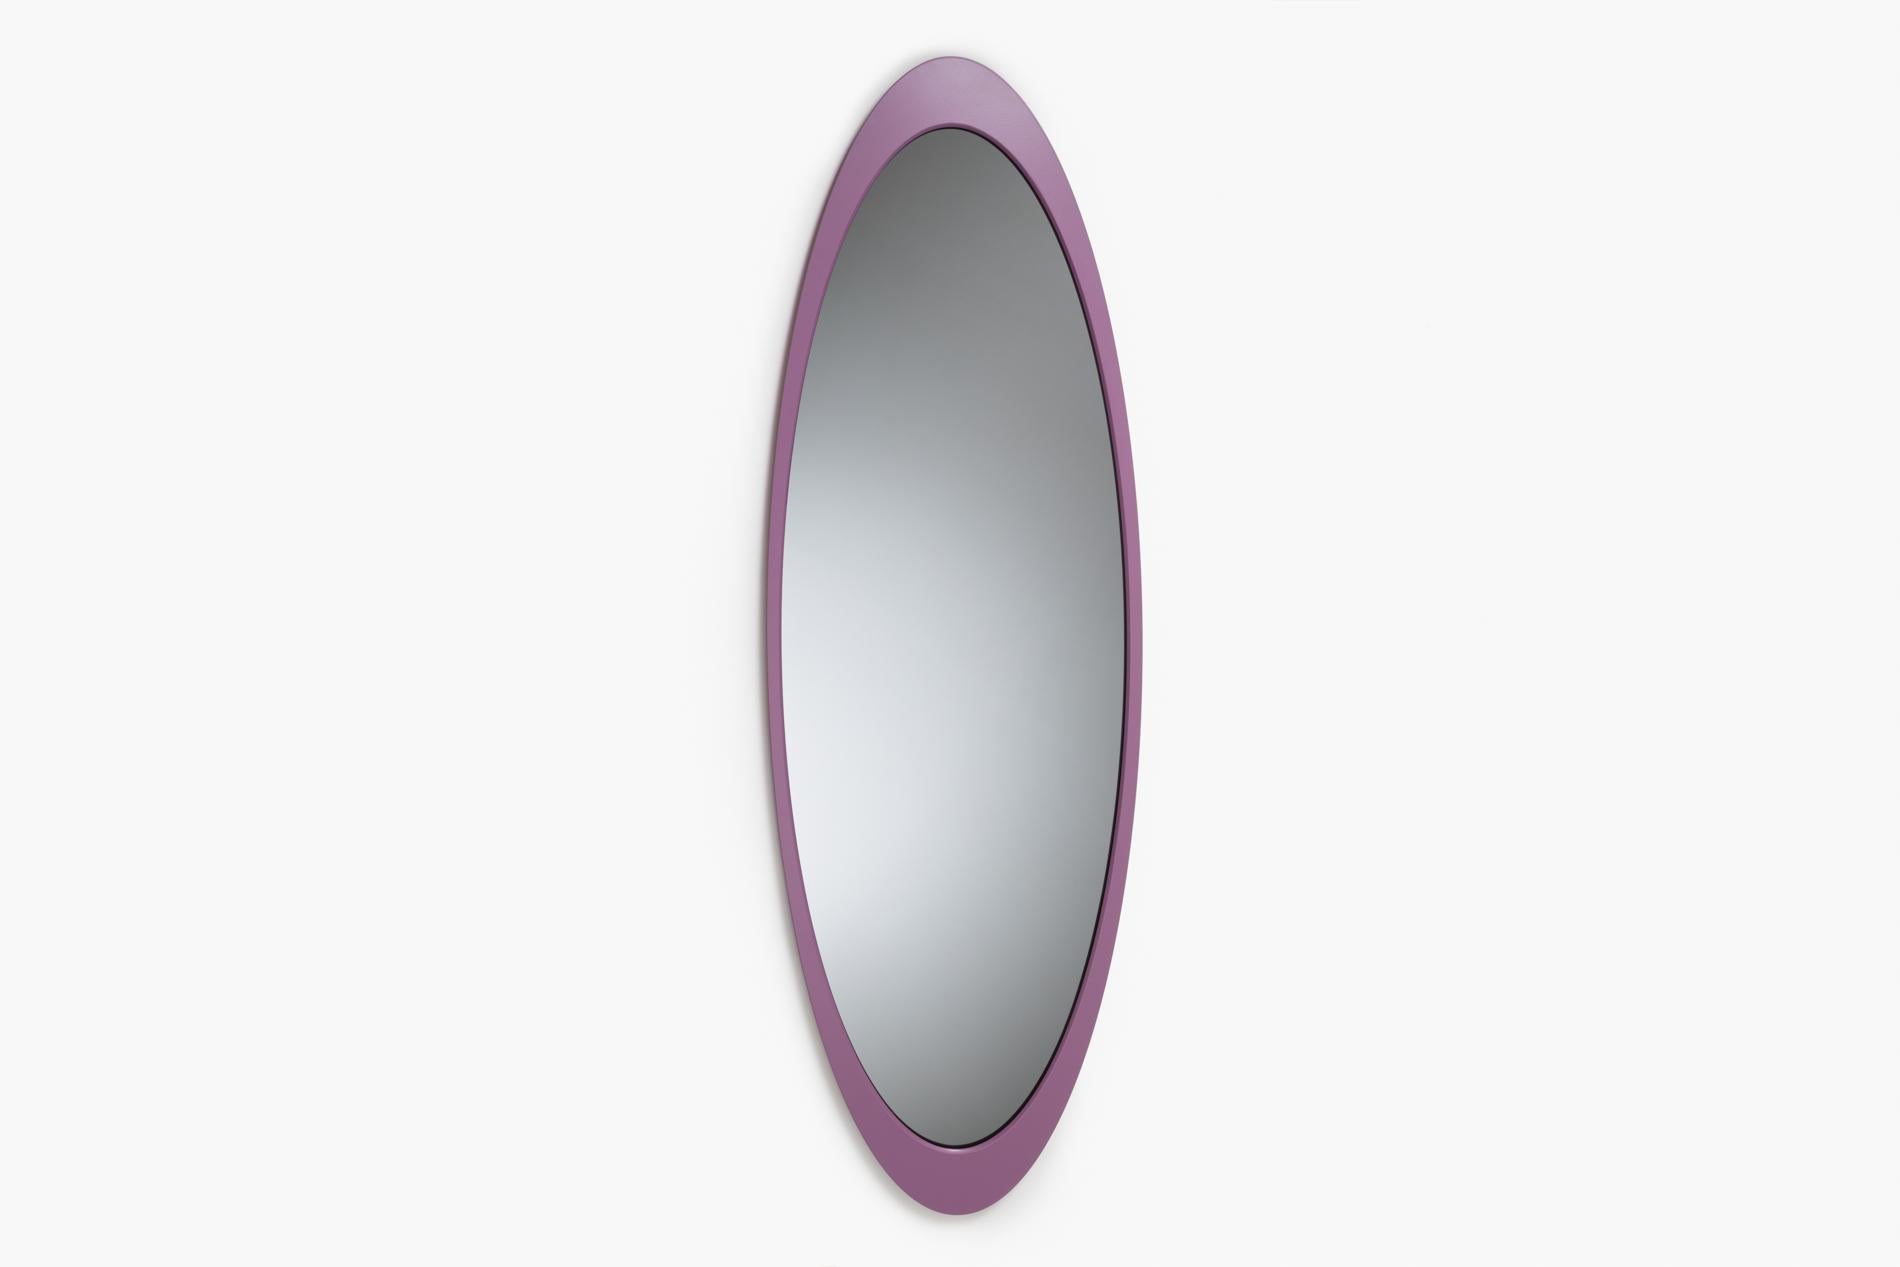 Mirooo large mirror by Moure Studio
Dimensions: D 140 x H 45 cm
Materials: Smoked glass and steel.

3 mirrors in grey smoked glass and coloured steel in different colours.
Together, these mirrors give a strong look to an interior.
Their